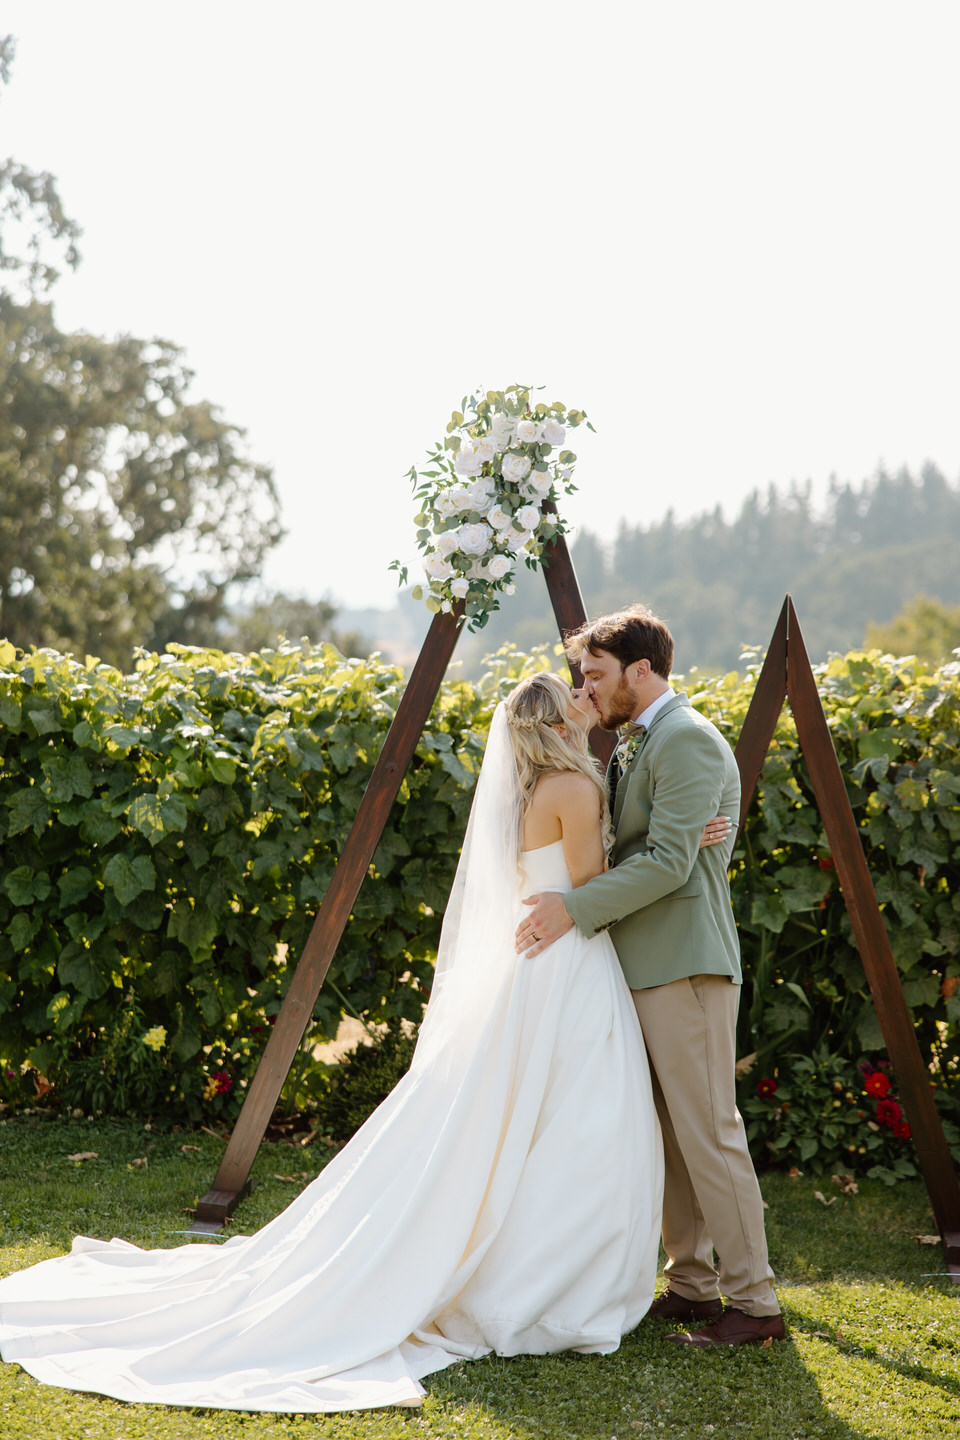 first kiss in the garden vineyard with triangle arch backdrop